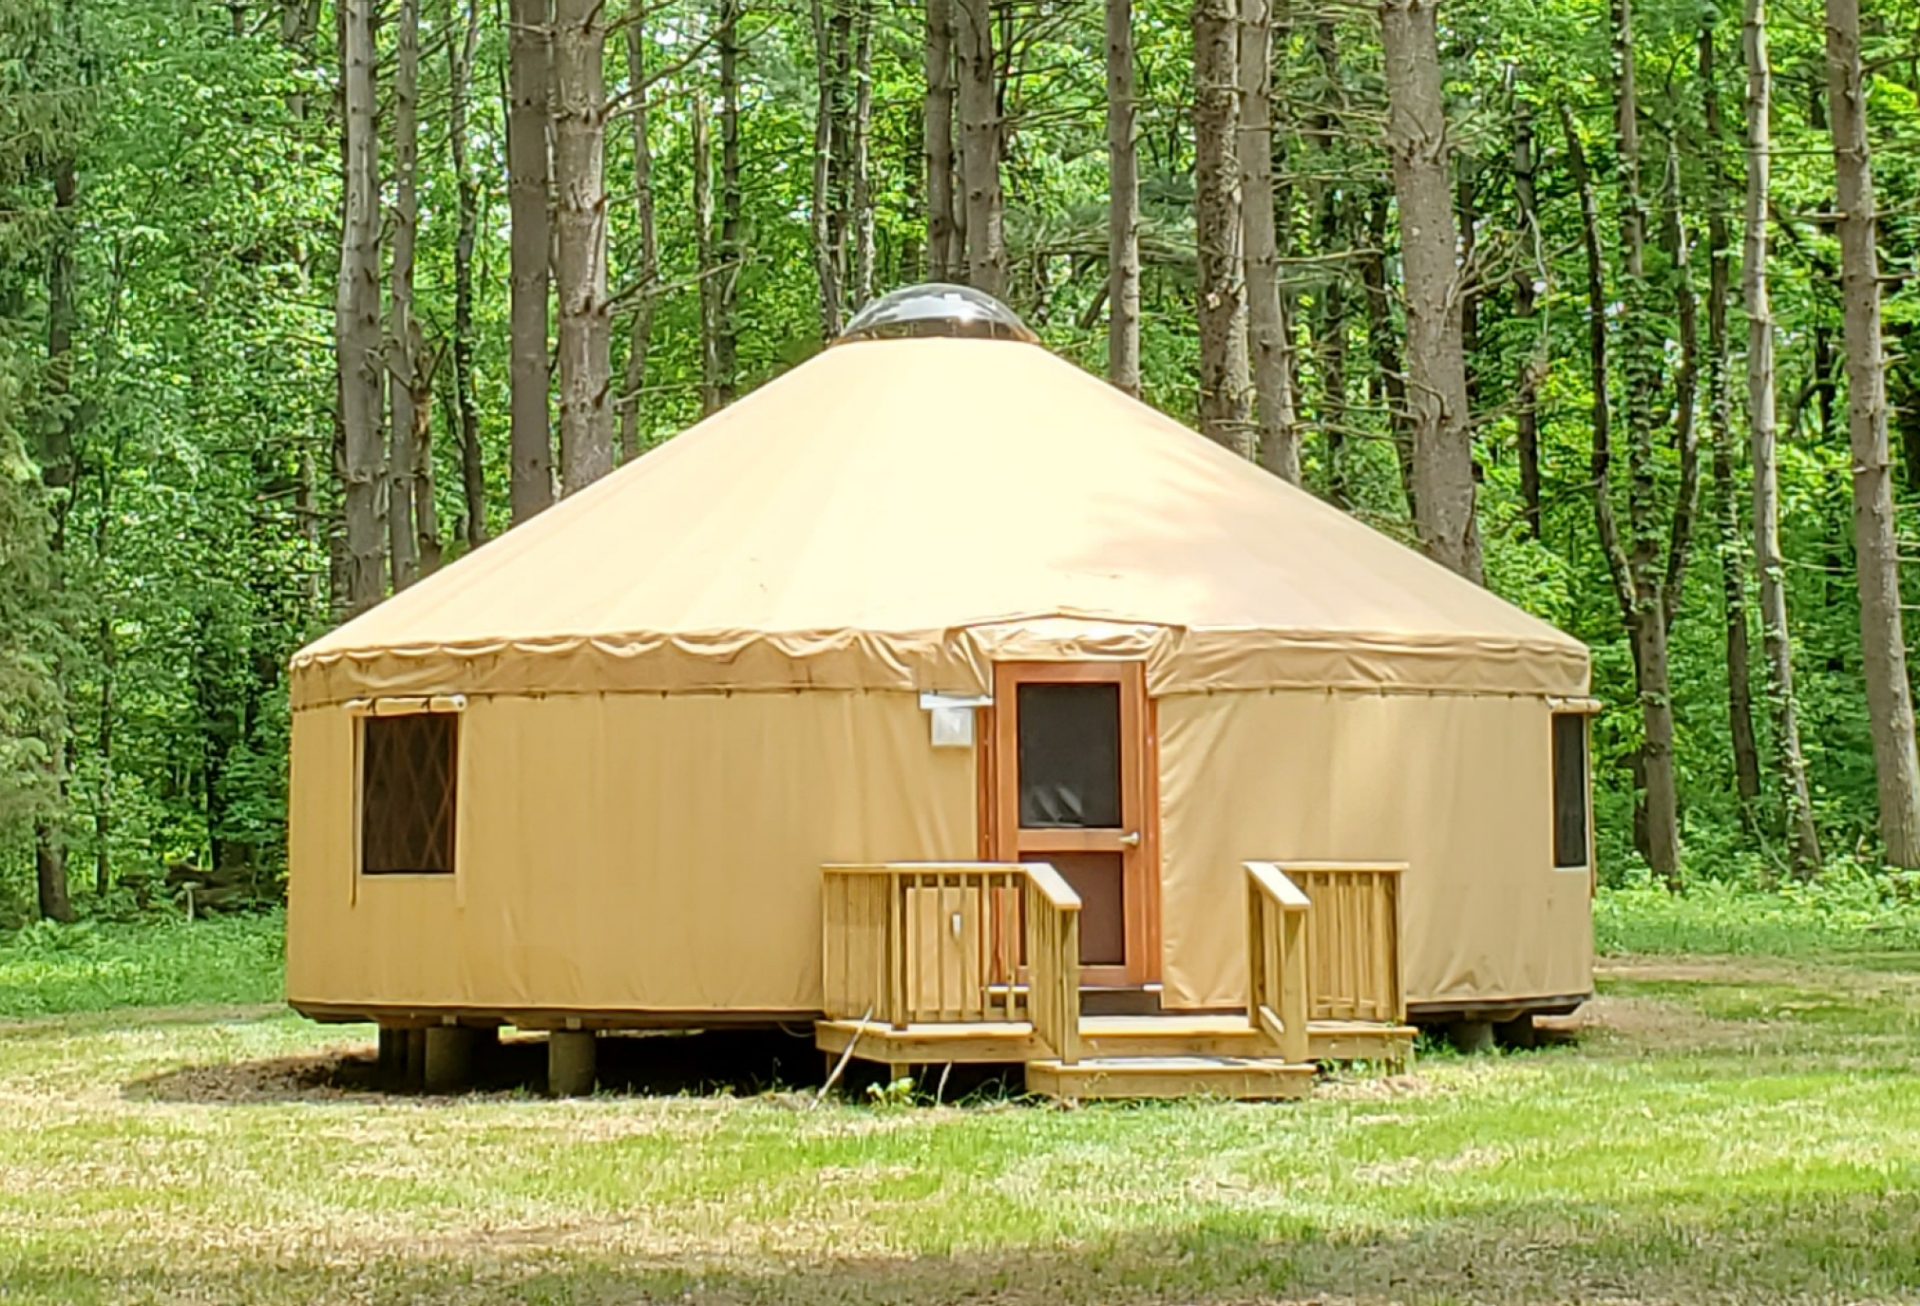 Photo of the new yurt at Camp Libbey surrounded by trees and forest